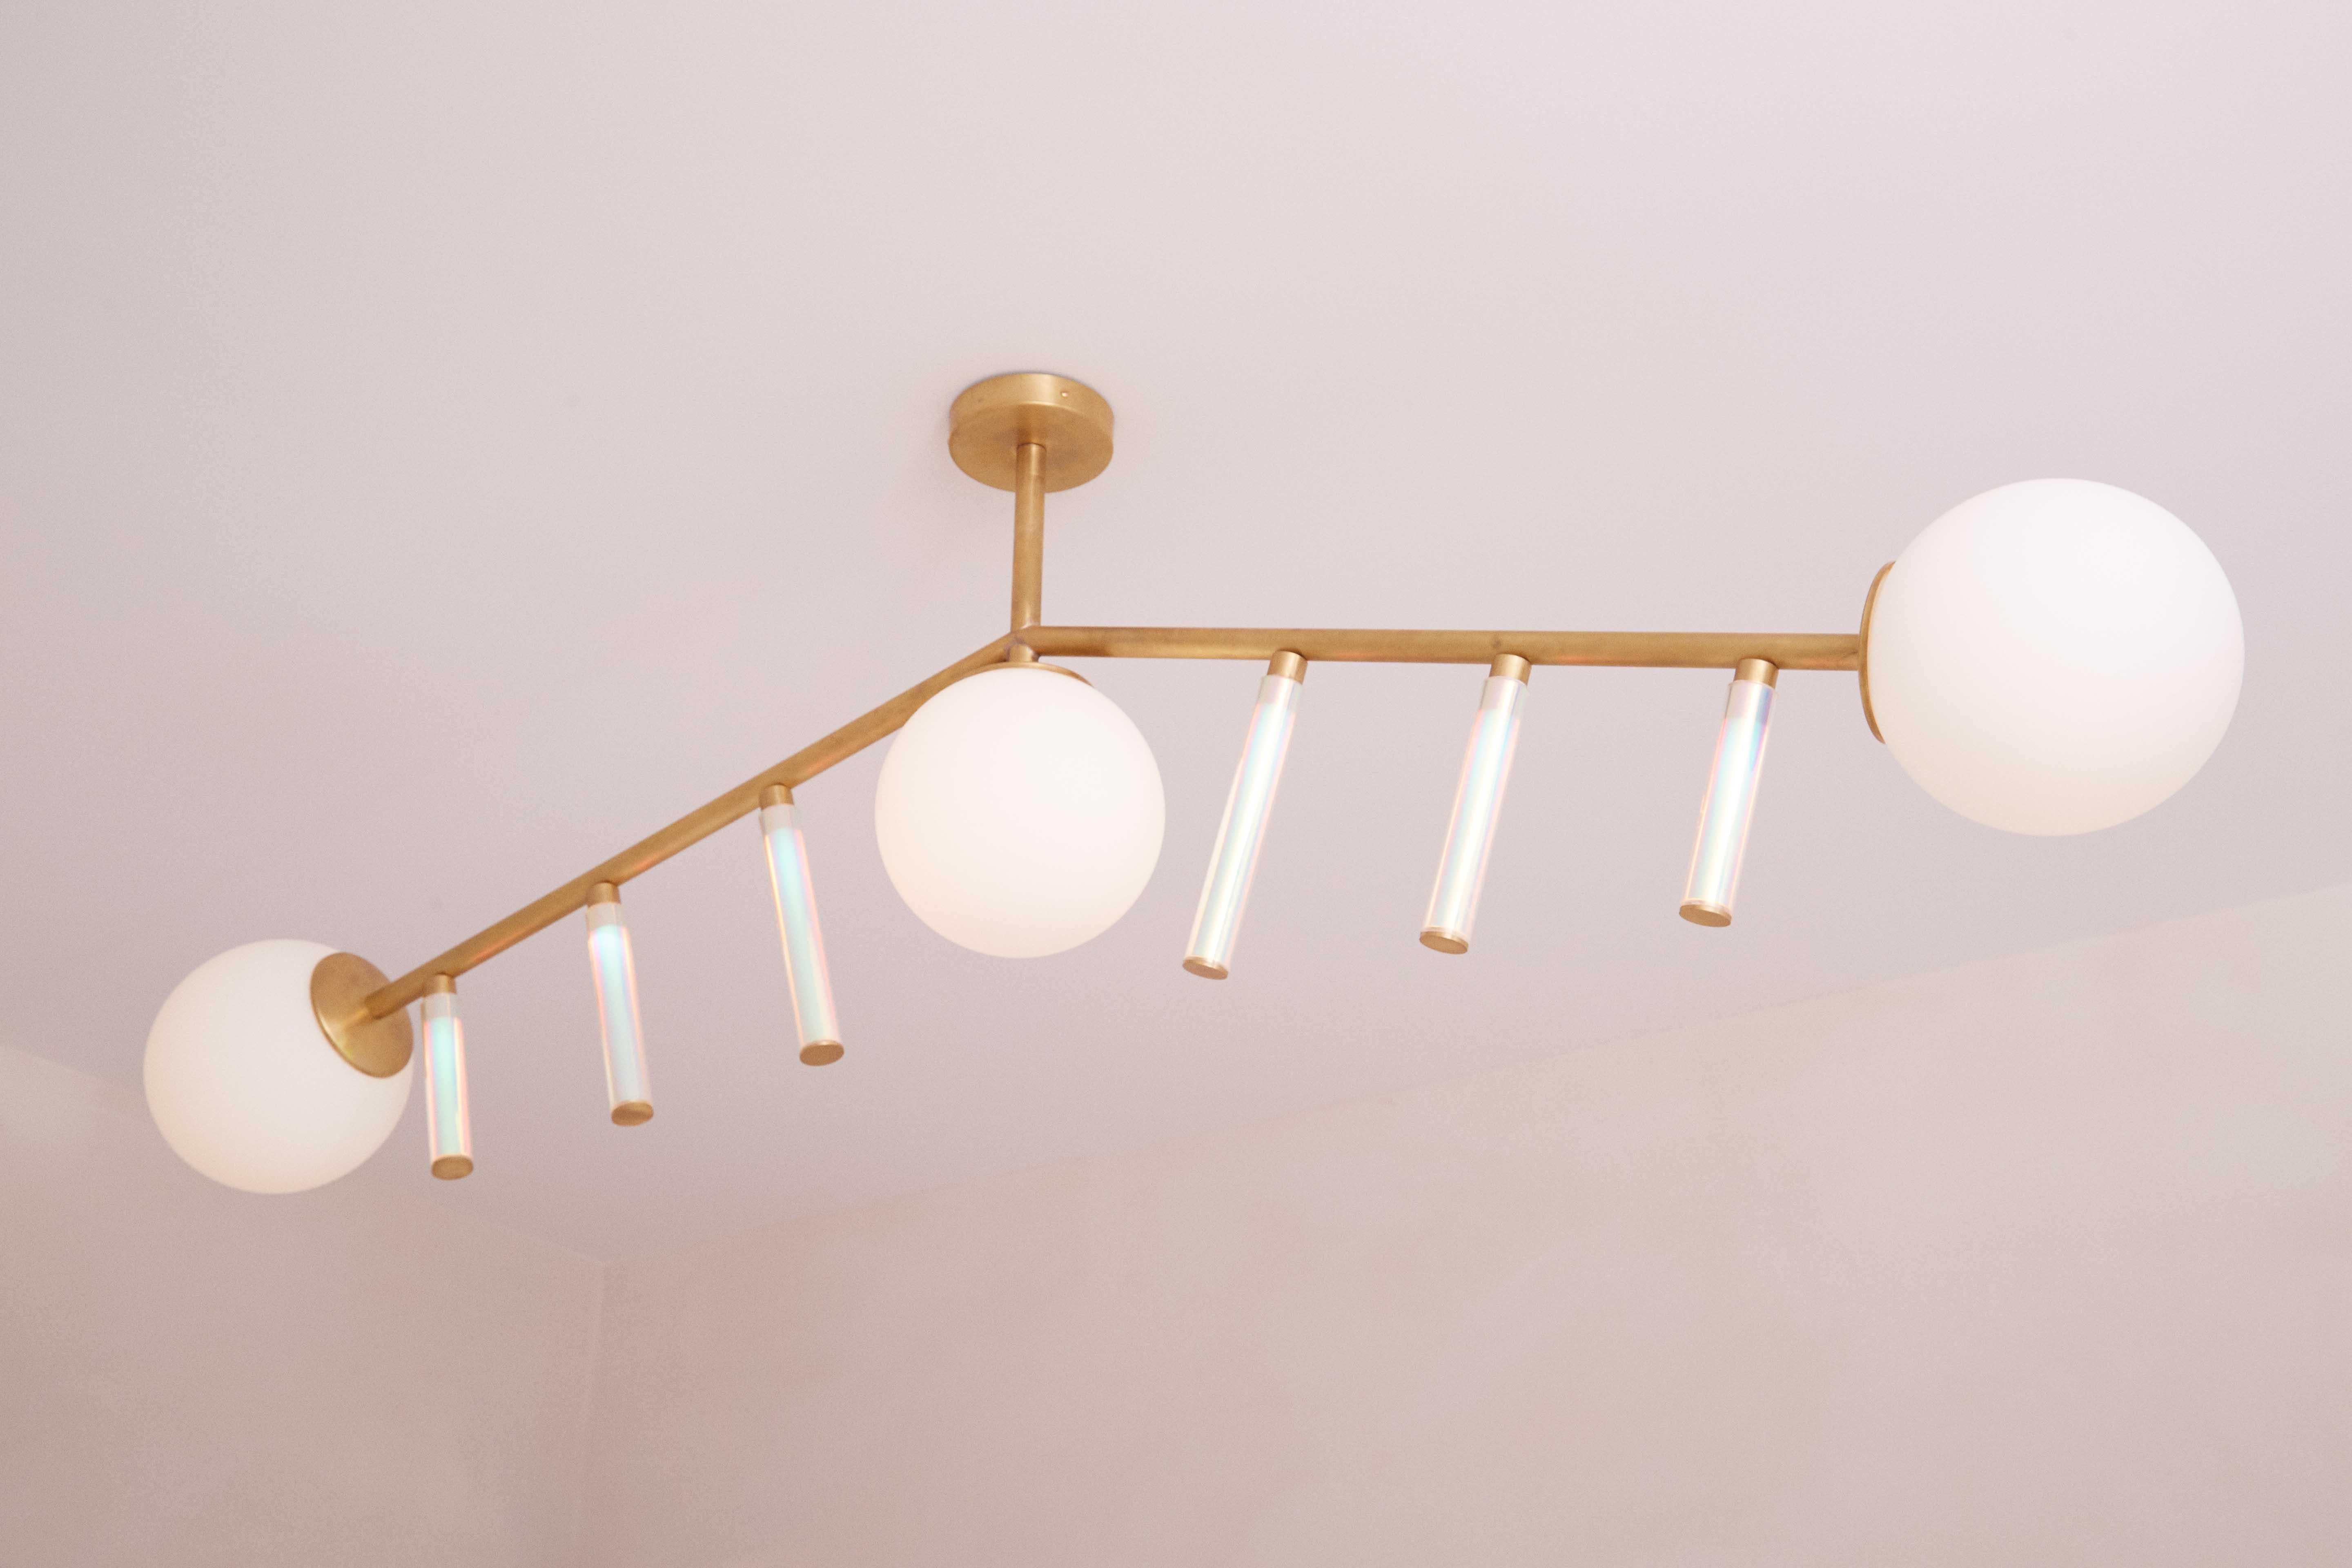 Hype XL Pendant Lamp by Patricia Bustos de la Torre
Dimensions: D 20 x W 161 x H 110 cm.
Materials: White opal glass, transparent methacrylate tubes, iridescent vinyl and brass.

Hype L Chandedier is a two brassed armed hanging jewel, holding three